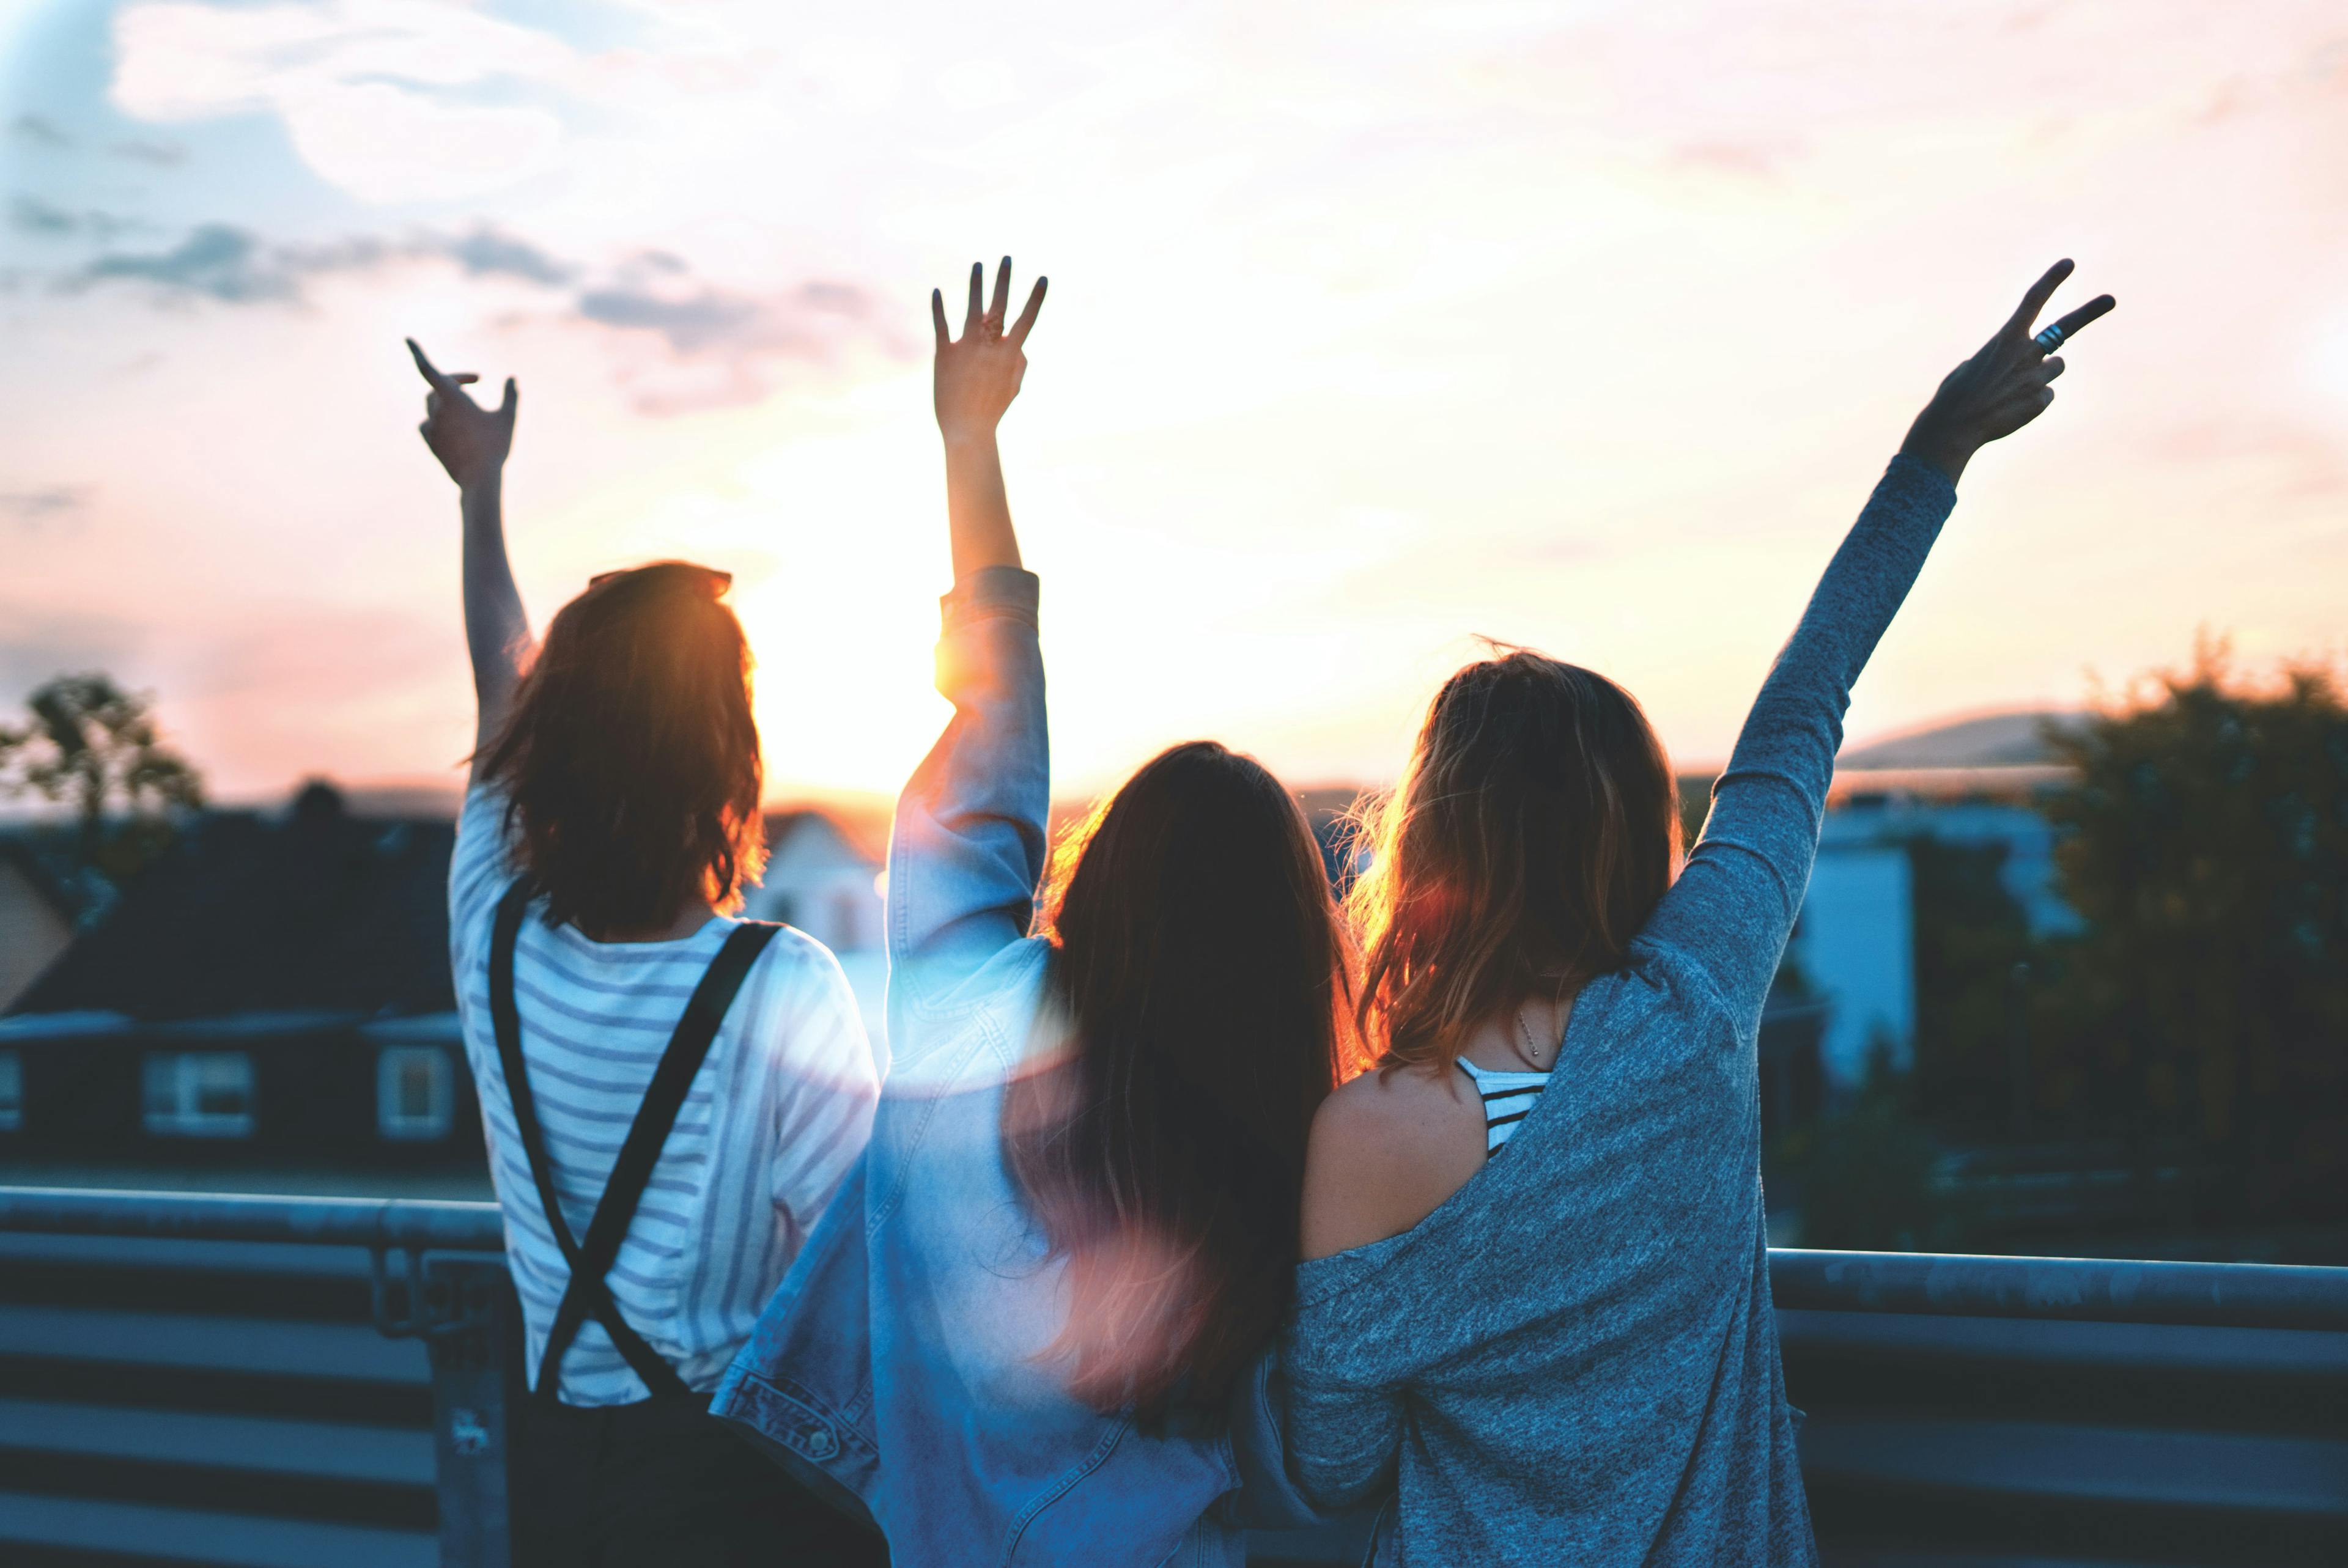 Three friends stand on a roof at sunset, their backs facing the camera. Their arms are outstretched in celebration.